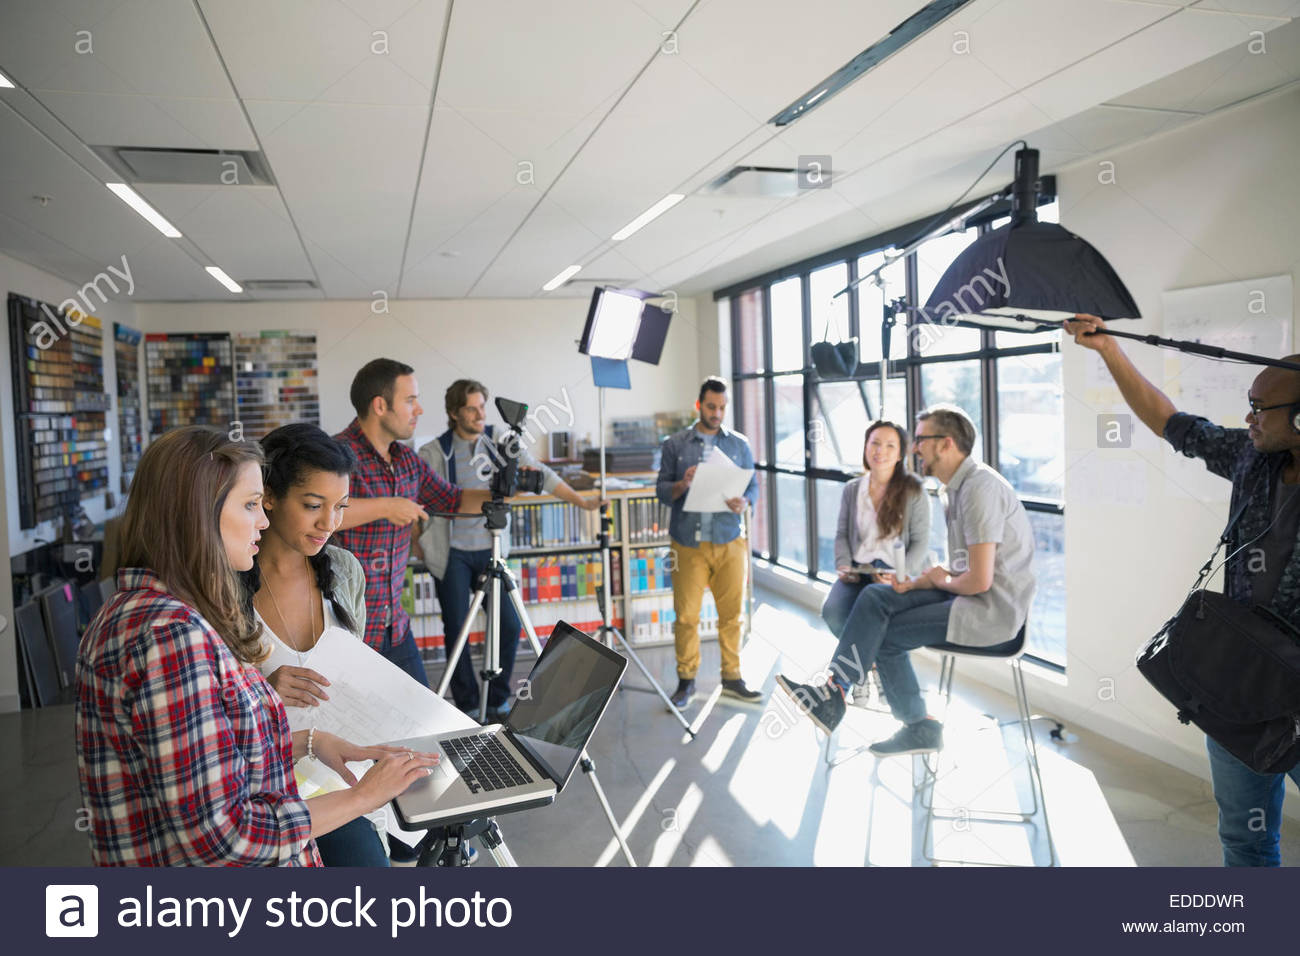 Business people shooting video tutorial Stock Photo